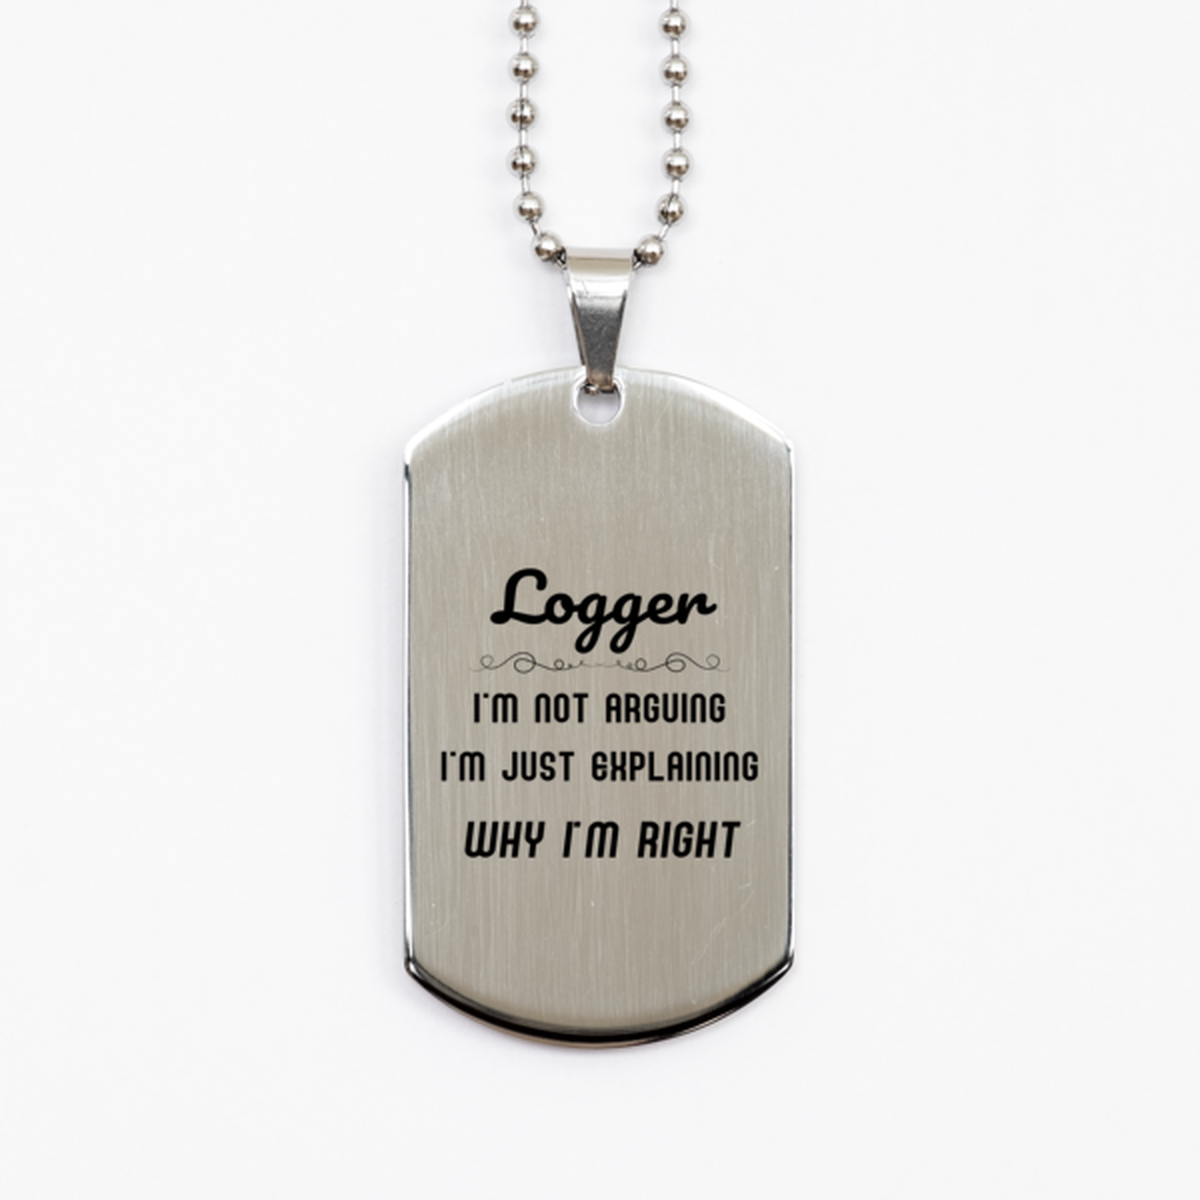 Logger I'm not Arguing. I'm Just Explaining Why I'm RIGHT Silver Dog Tag, Funny Saying Quote Logger Gifts For Logger Graduation Birthday Christmas Gifts for Men Women Coworker